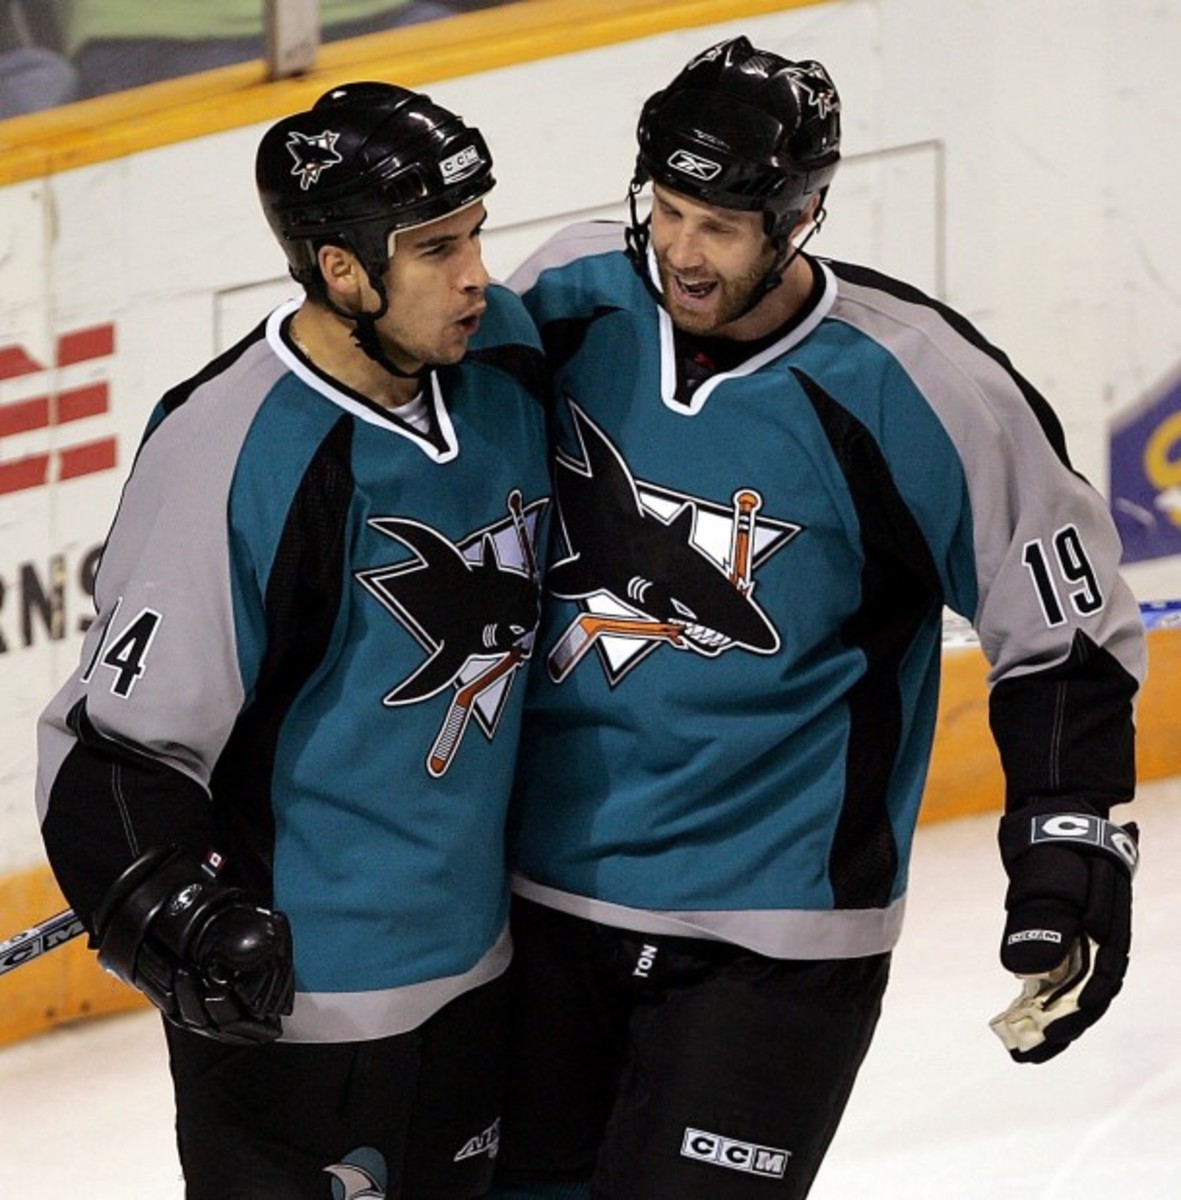 Jonathan Cheechoo and Joe Thornton, arguably the best one two punch of the 05-06 NHL season